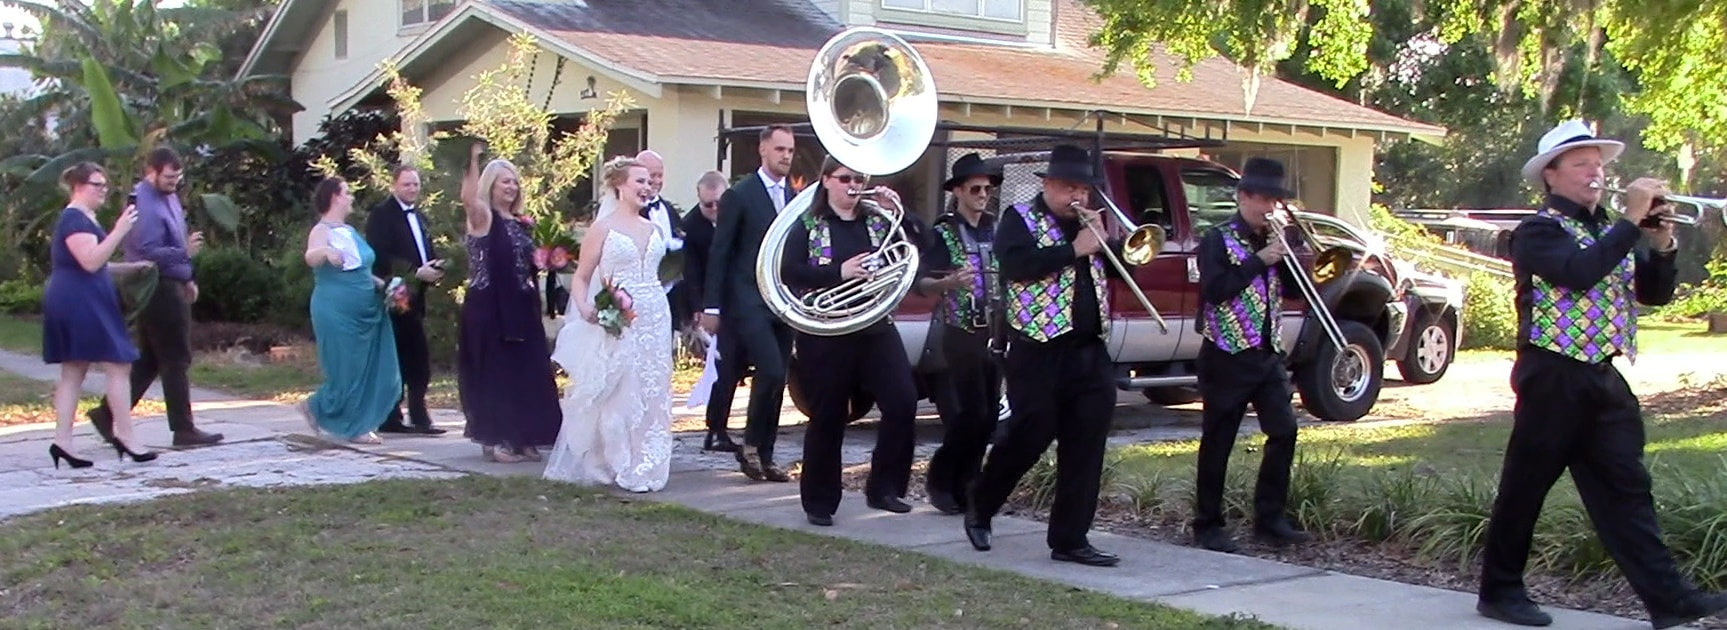 Real Deal Brass Band, Second Line Band for wedding, Gainesville, The Villages, Ocala, Leesburg, Fl.